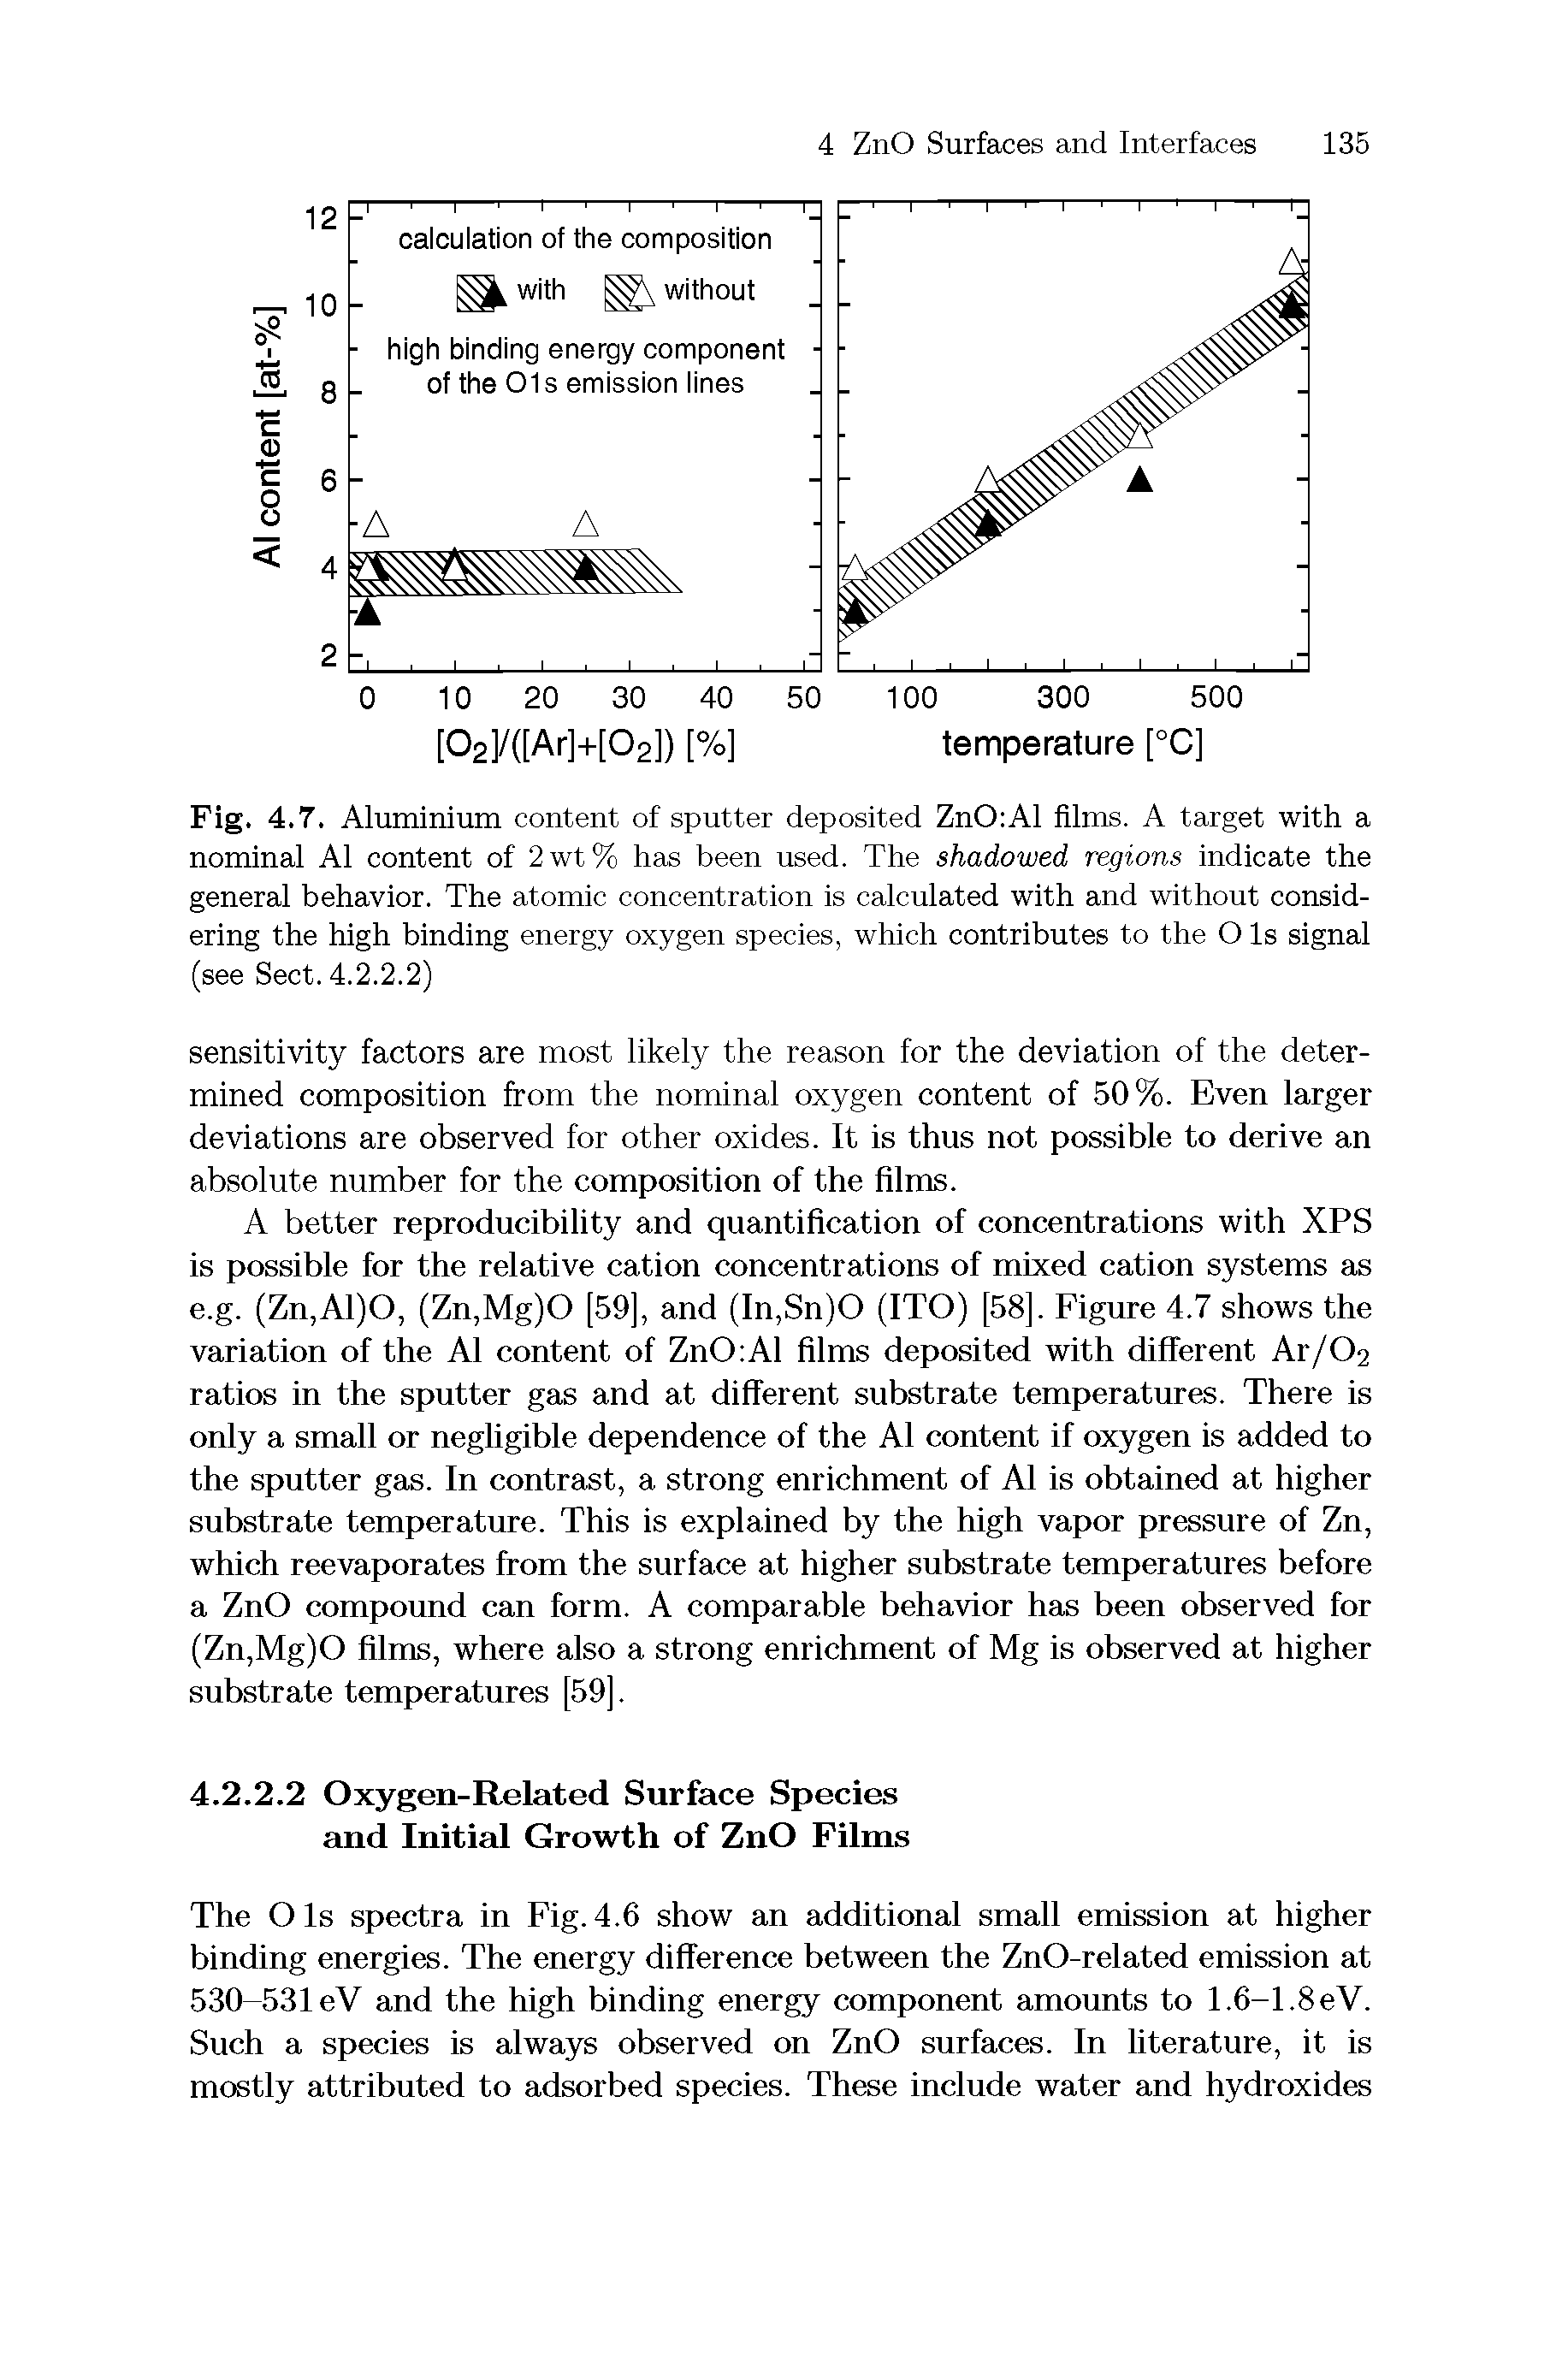 Fig. 4.7. Aluminium content of sputter deposited ZnO Al films. A target with a nominal A1 content of 2wt% has been used. The shadowed regions indicate the general behavior. The atomic concentration is calculated with and without considering the high binding energy oxygen species, which contributes to the O Is signal (see Sect. 4.2.2.2)...